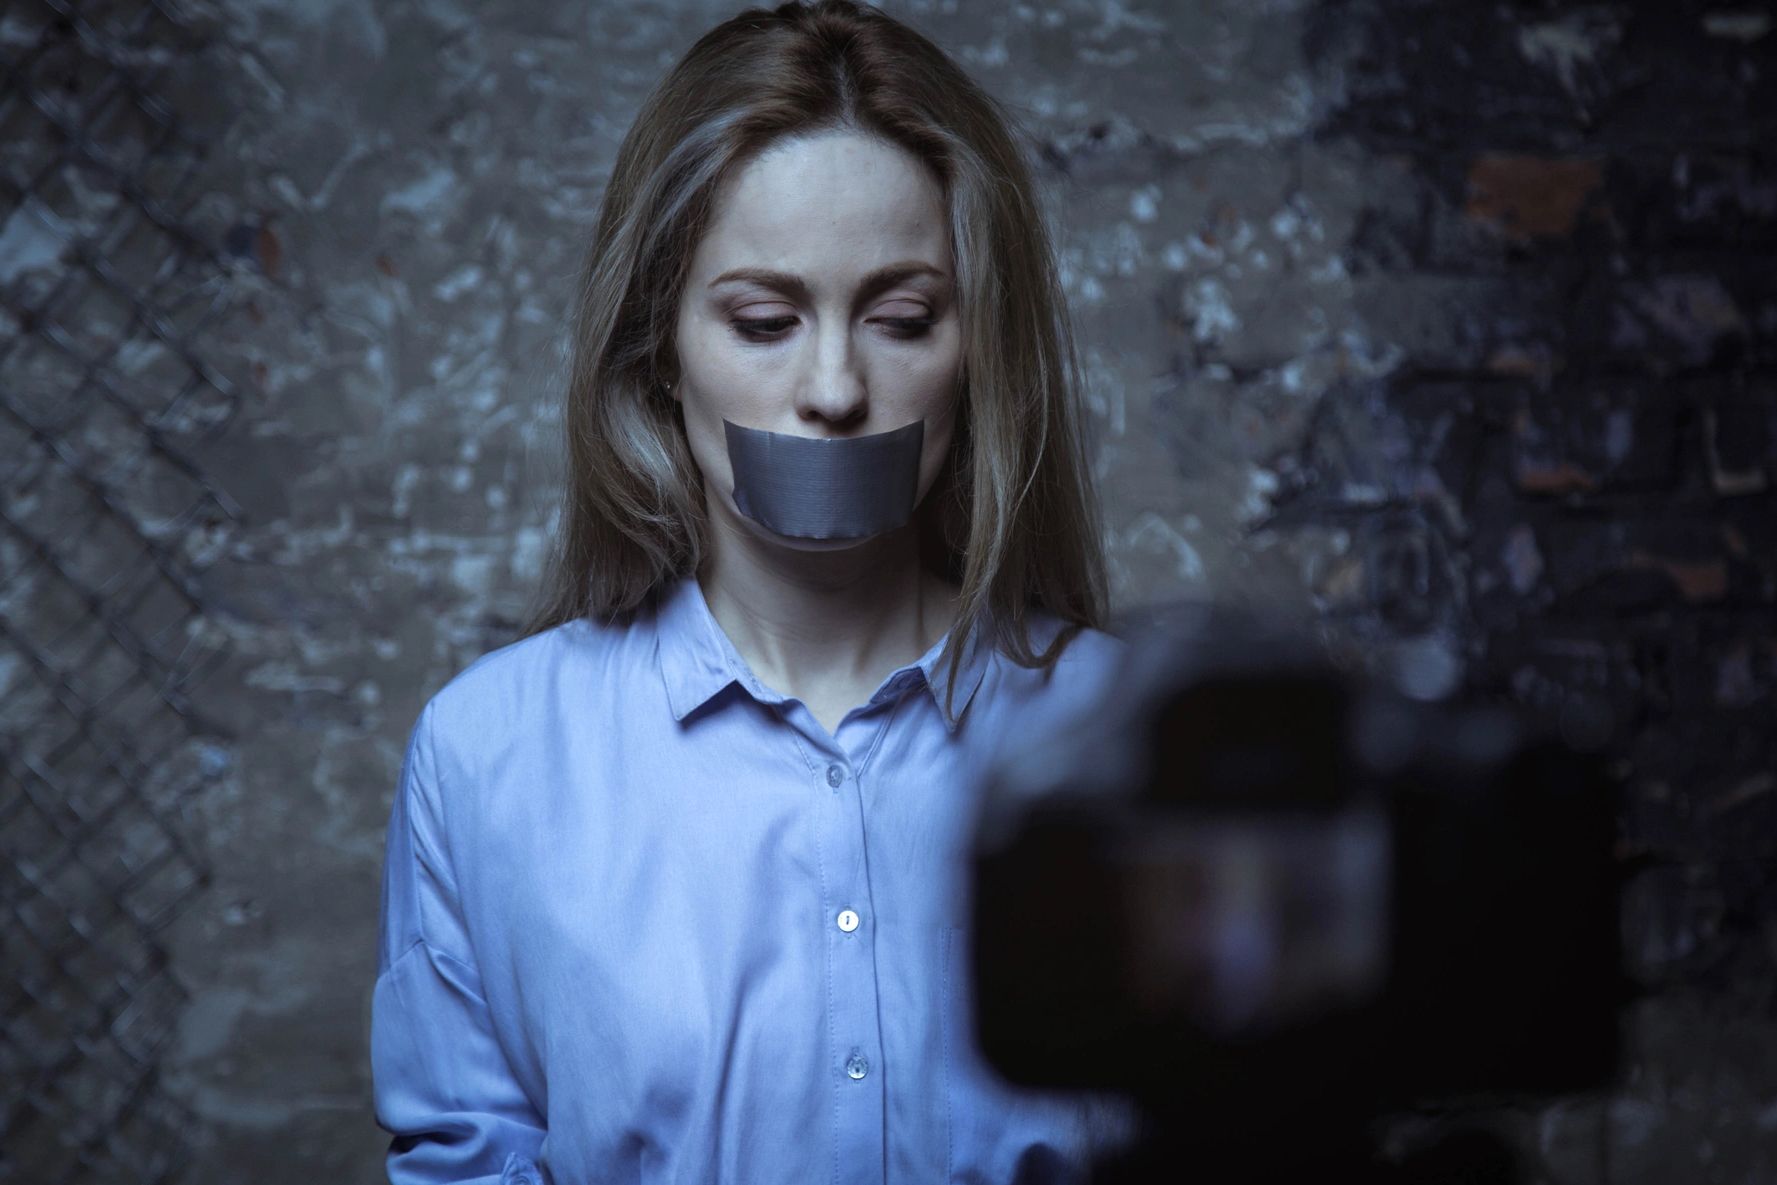 A woman kidnapped with mouth closed with a black tape